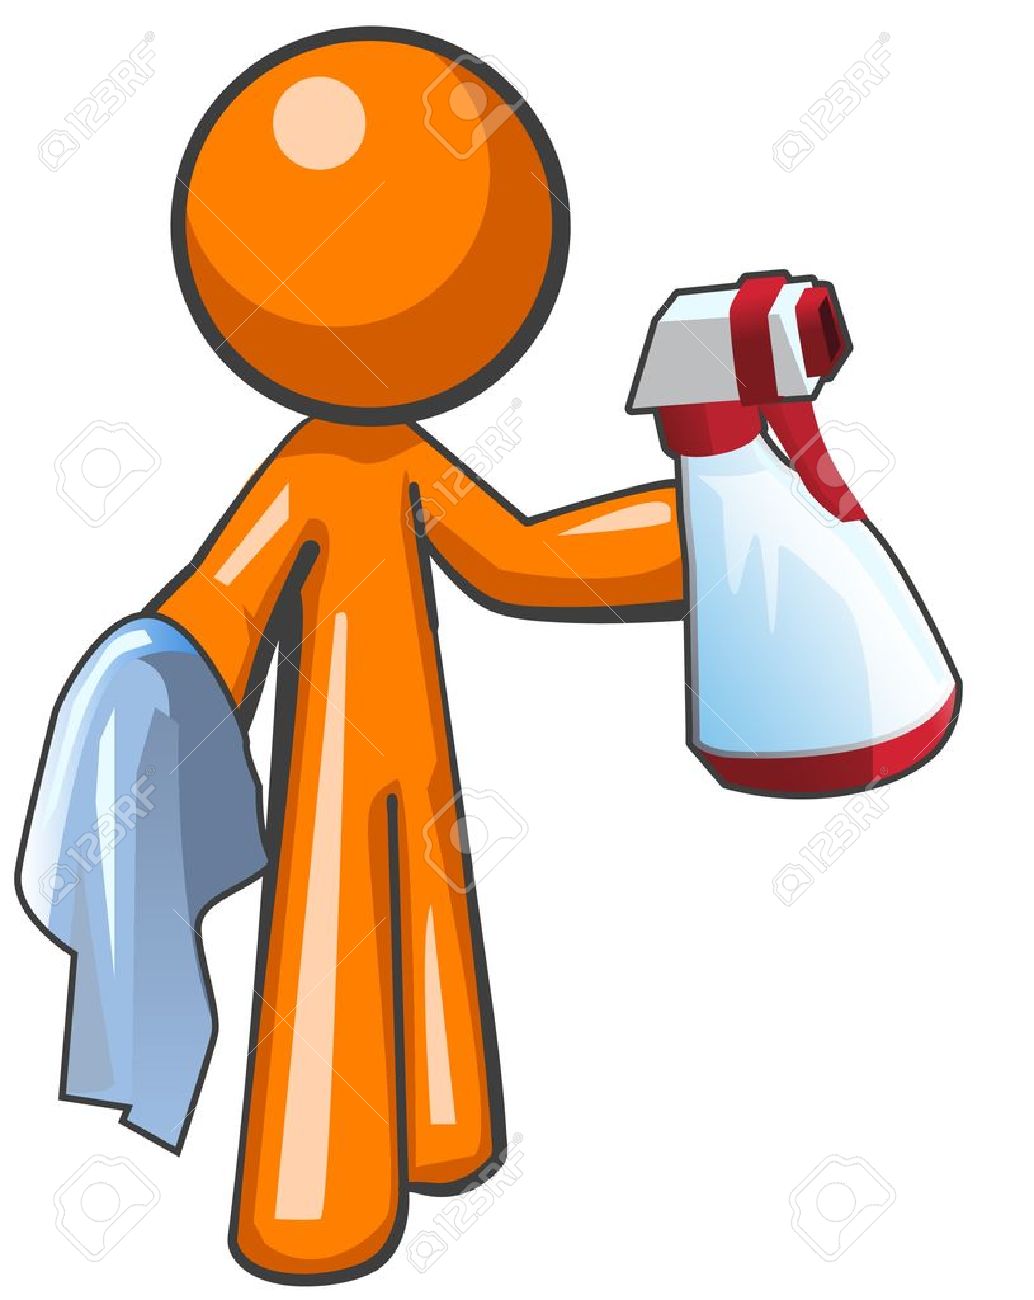 Orange Man With A Sanitation Spray Bottle And Cloth, Ready To.